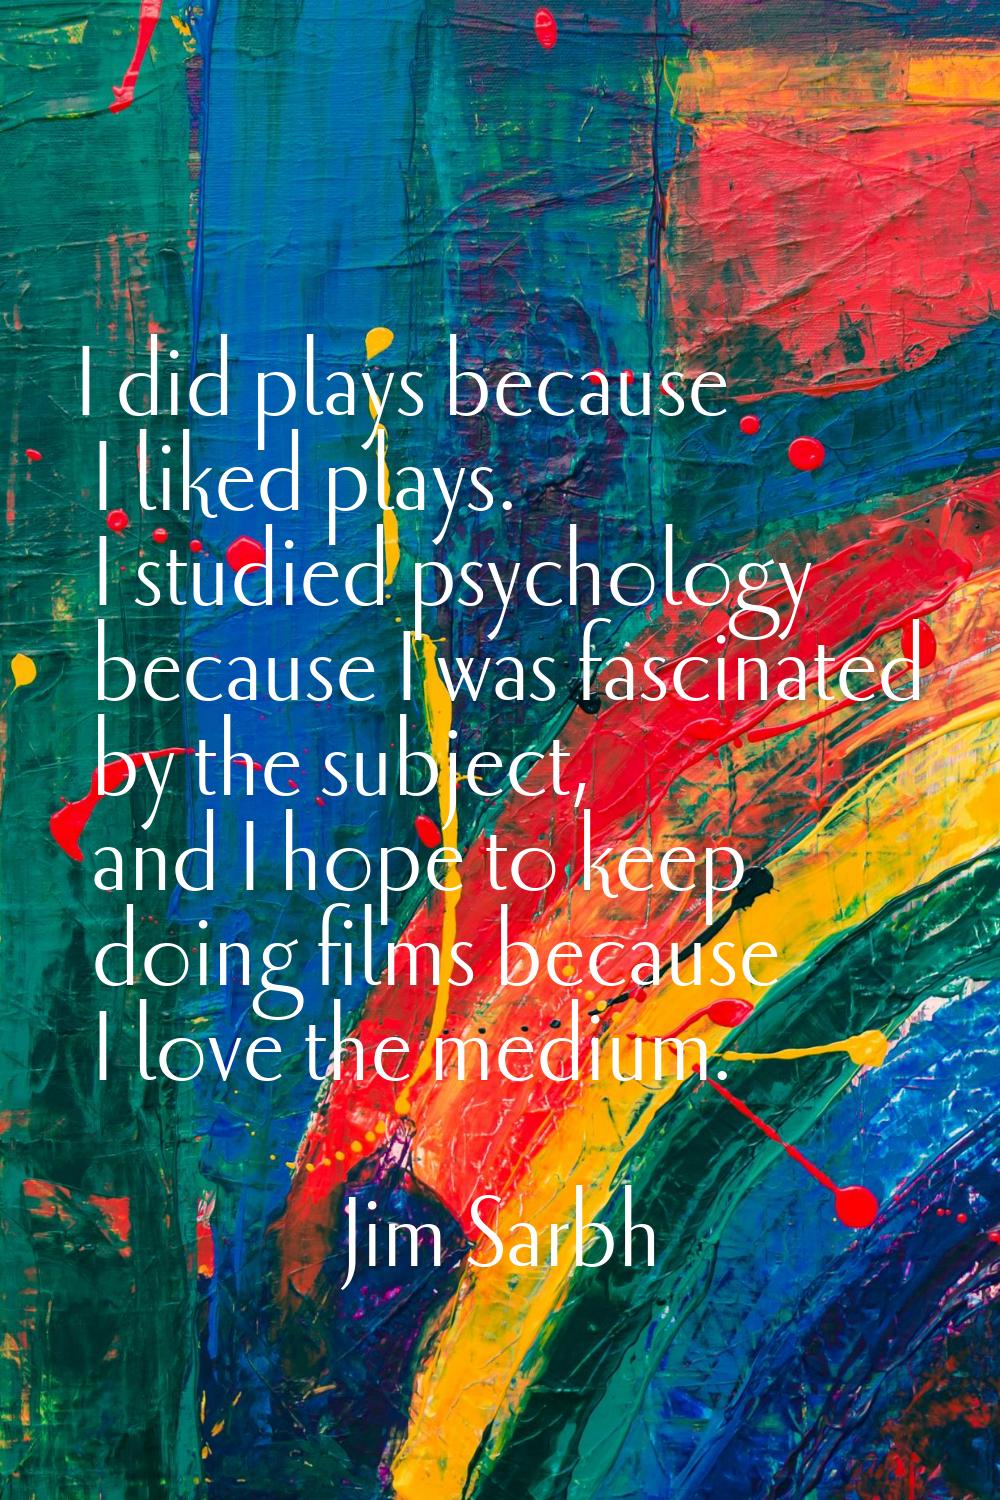 I did plays because I liked plays. I studied psychology because I was fascinated by the subject, an